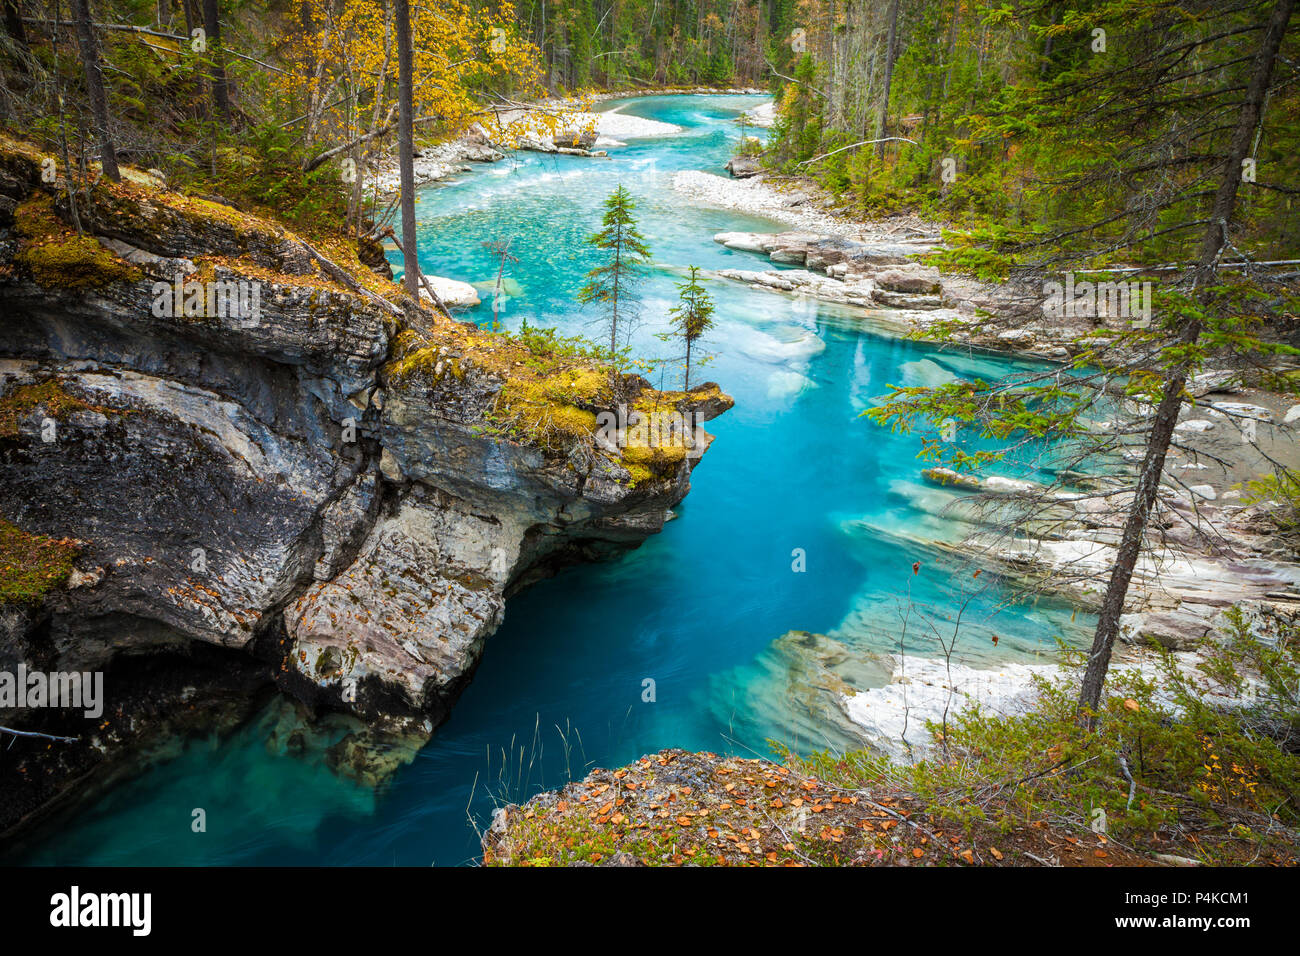 Turquoise blue river flowing through a canyon in the forest, British Columbia, Canada Stock Photo